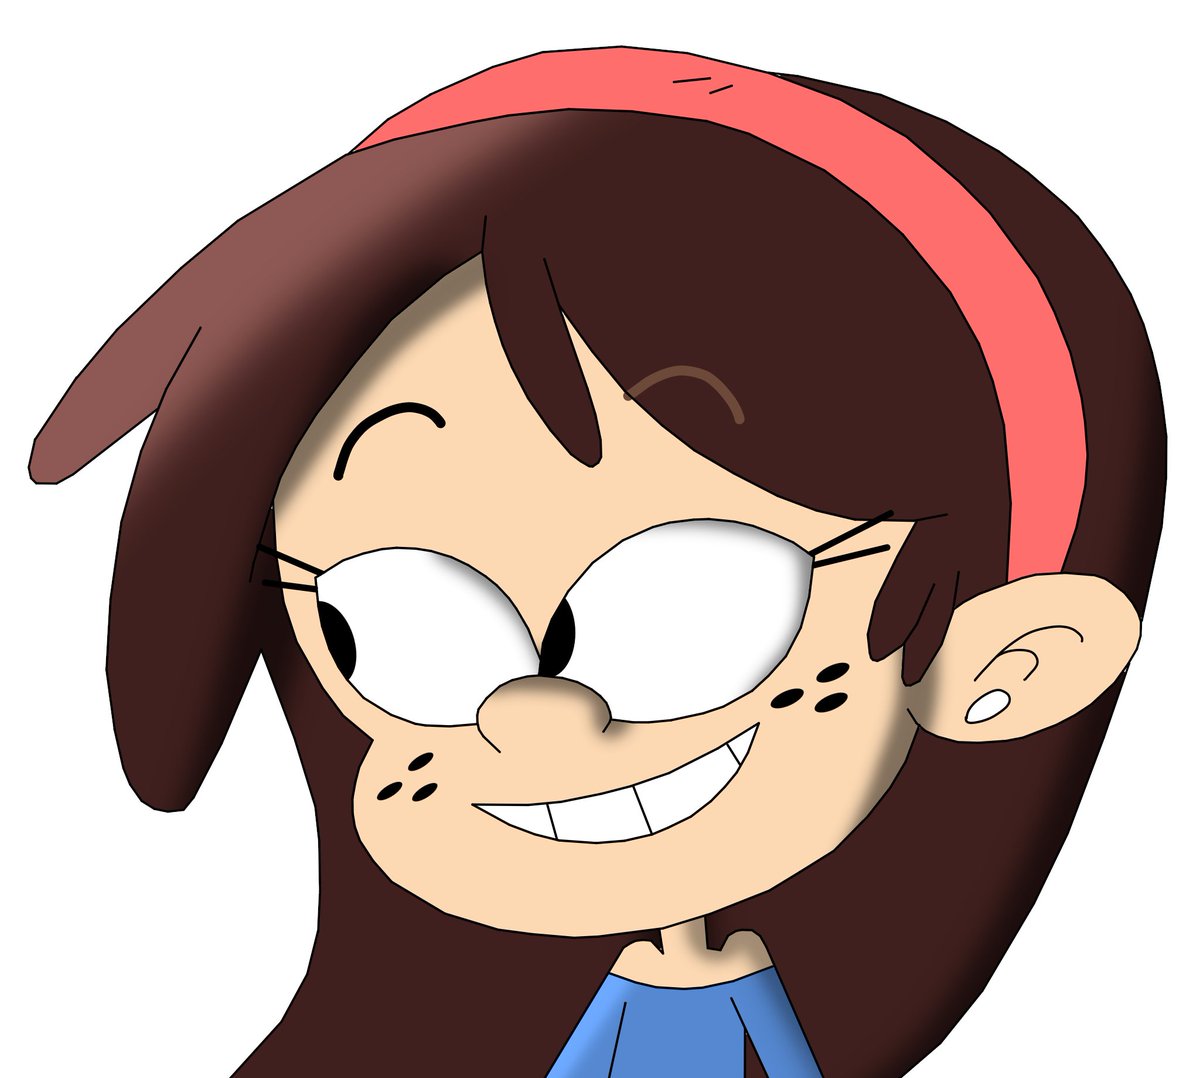 #SidChang #TheCasagrandes #TheLoudHouse #Nickelodeon #Fanart #Gift #Cute #AdelaideChang                                             

For @JMerca14 

It's almost Friday